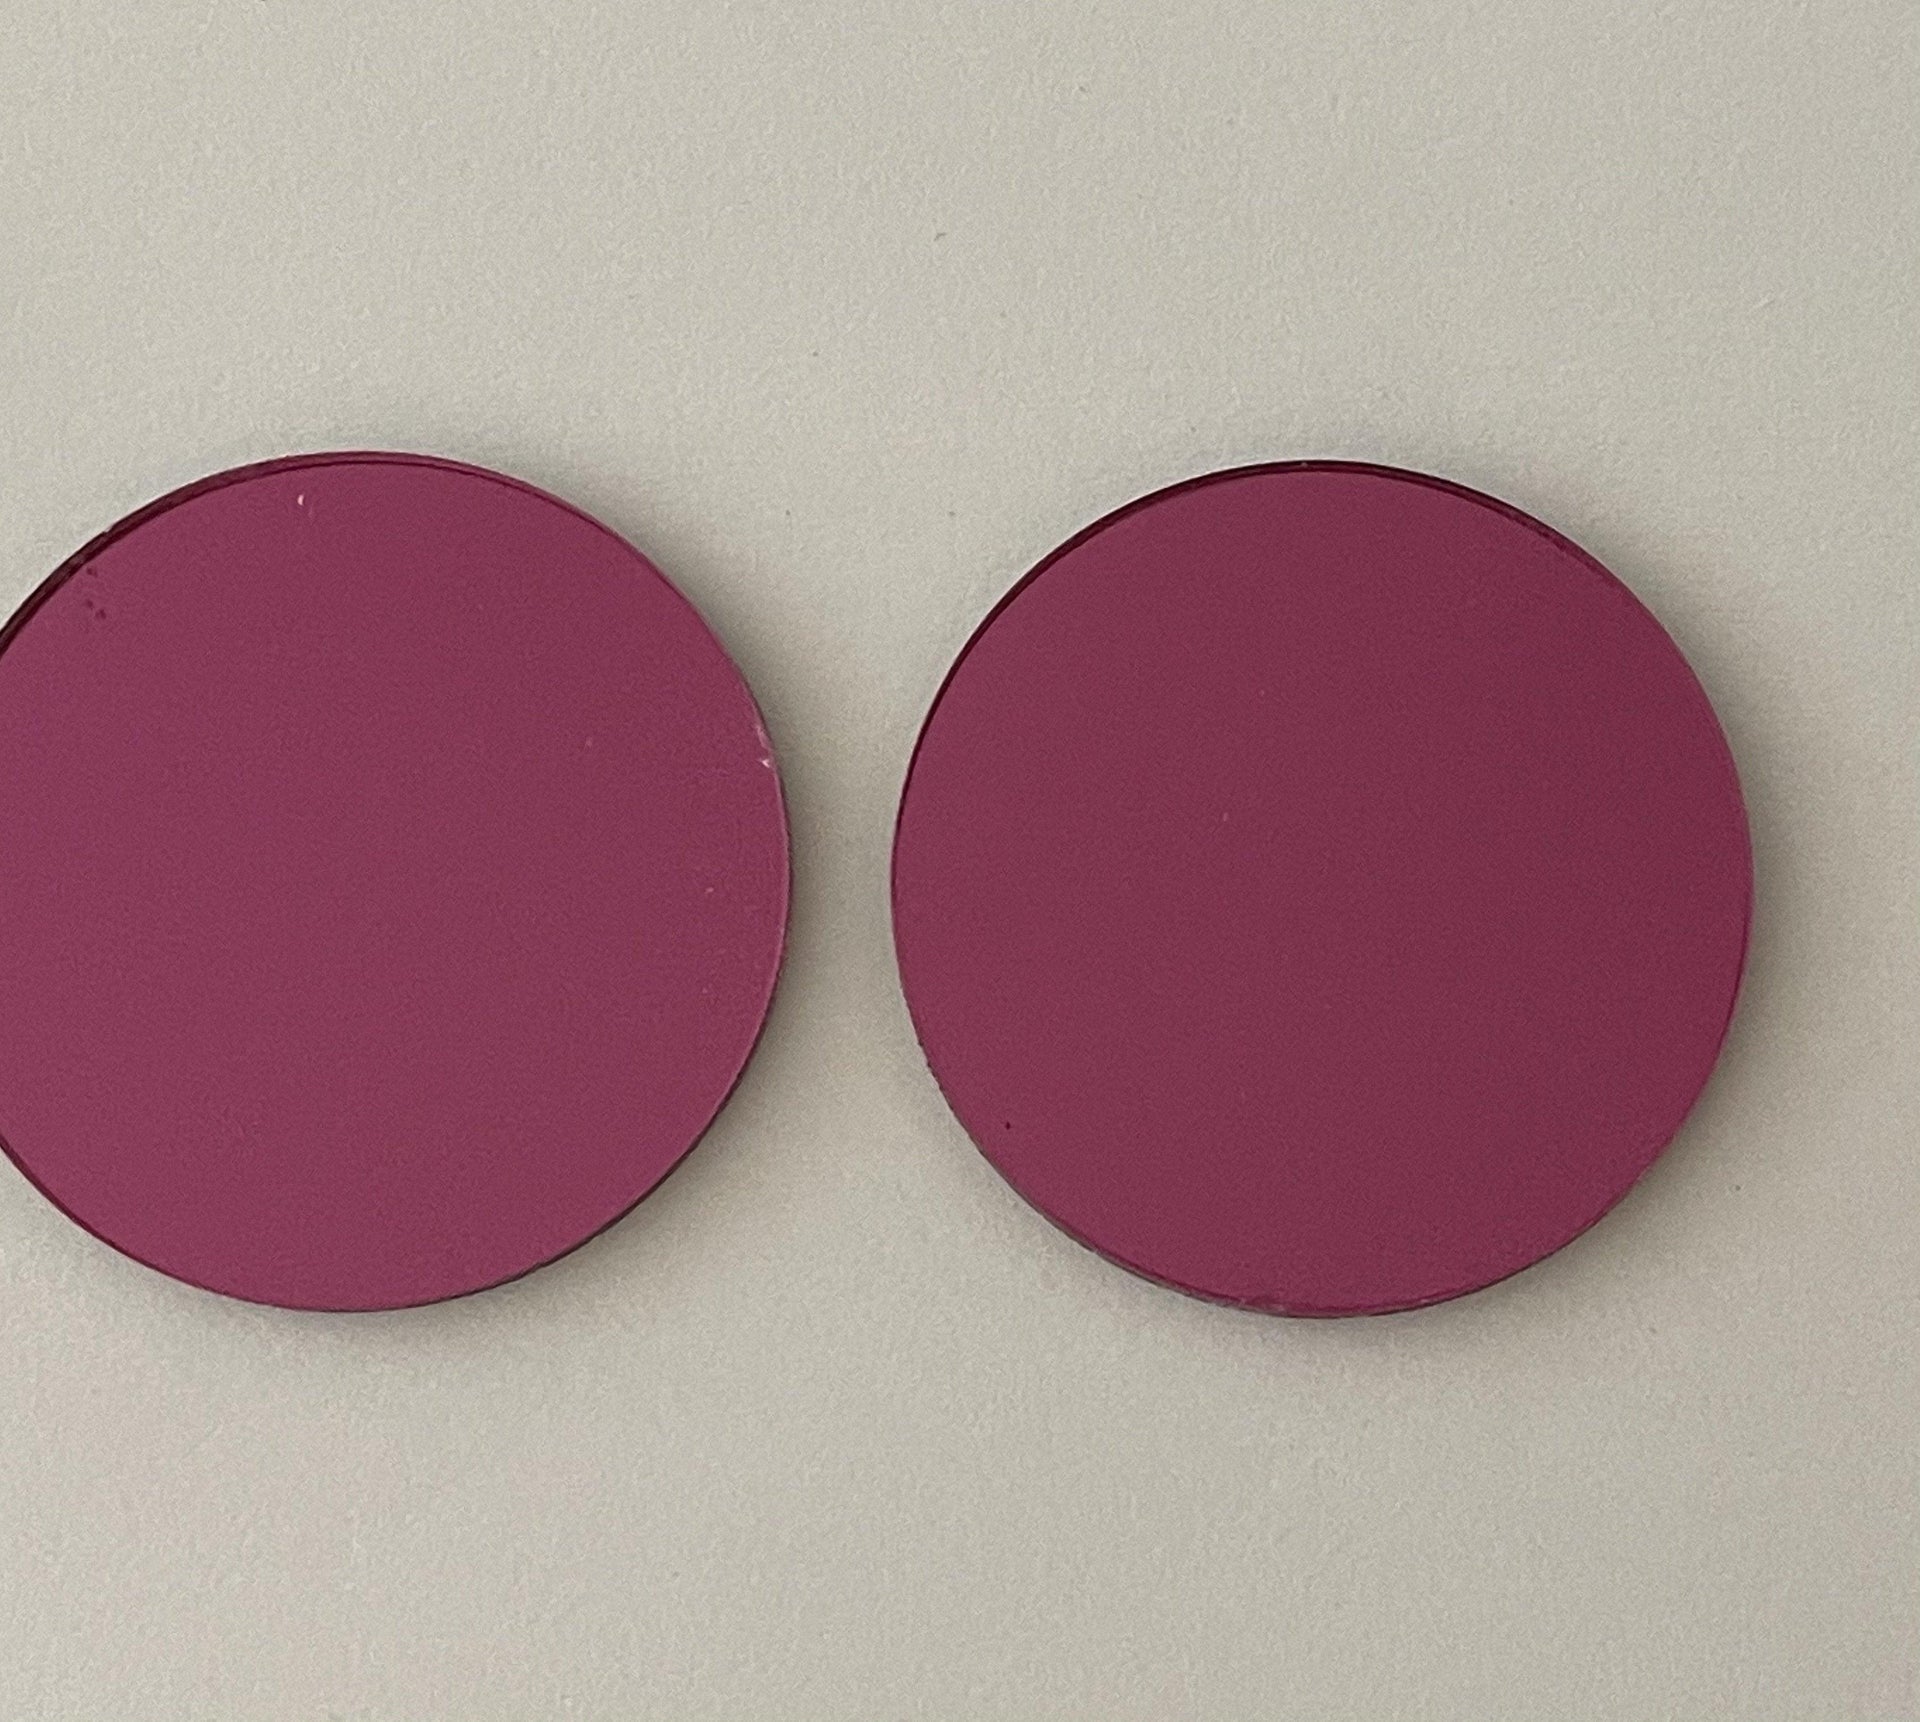 Blank Acrylic Shapes(Circle/rectangle/square) - Pink Mirror Blanks